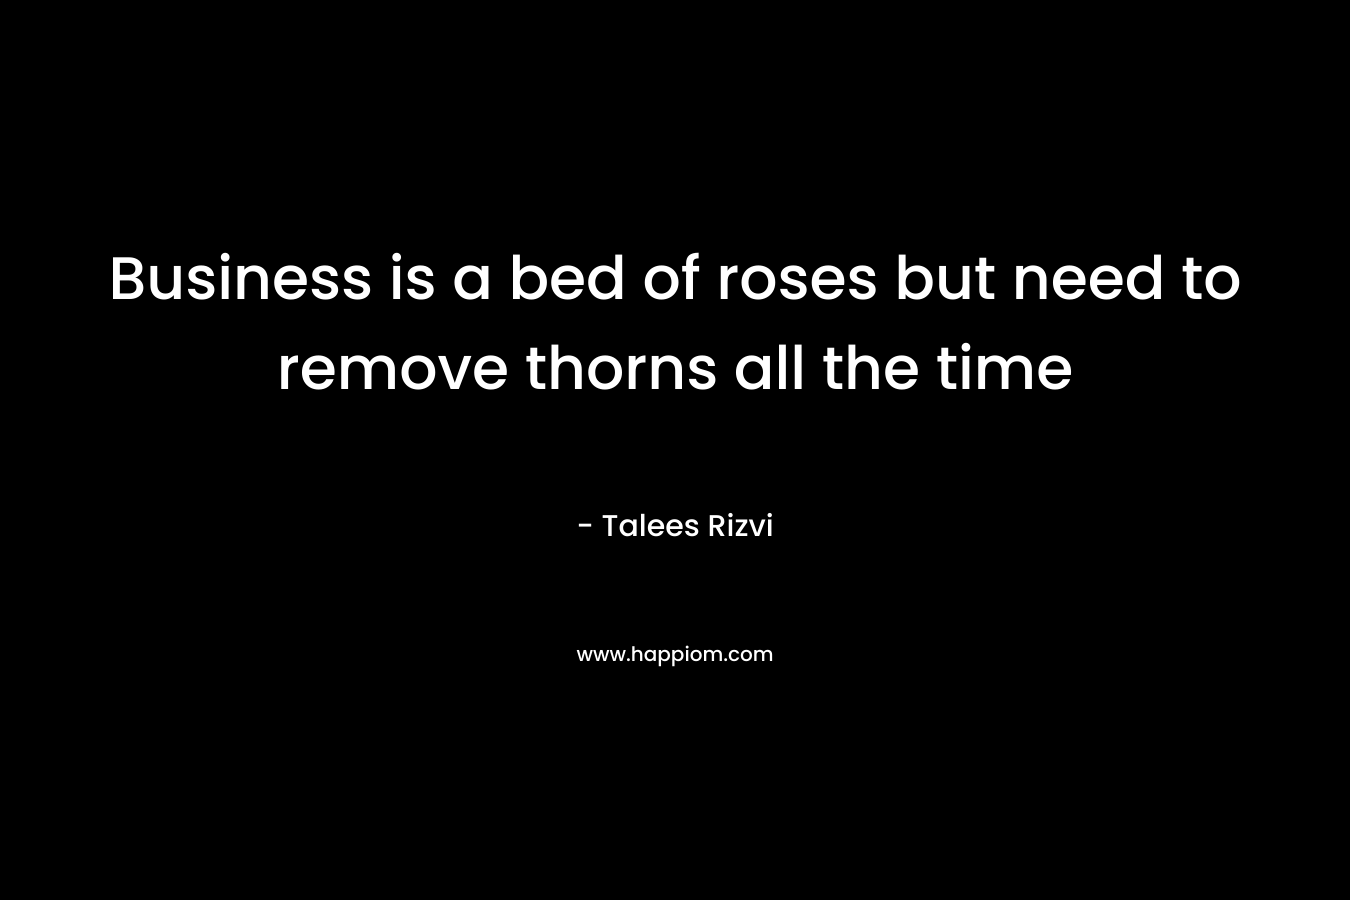 Business is a bed of roses but need to remove thorns all the time